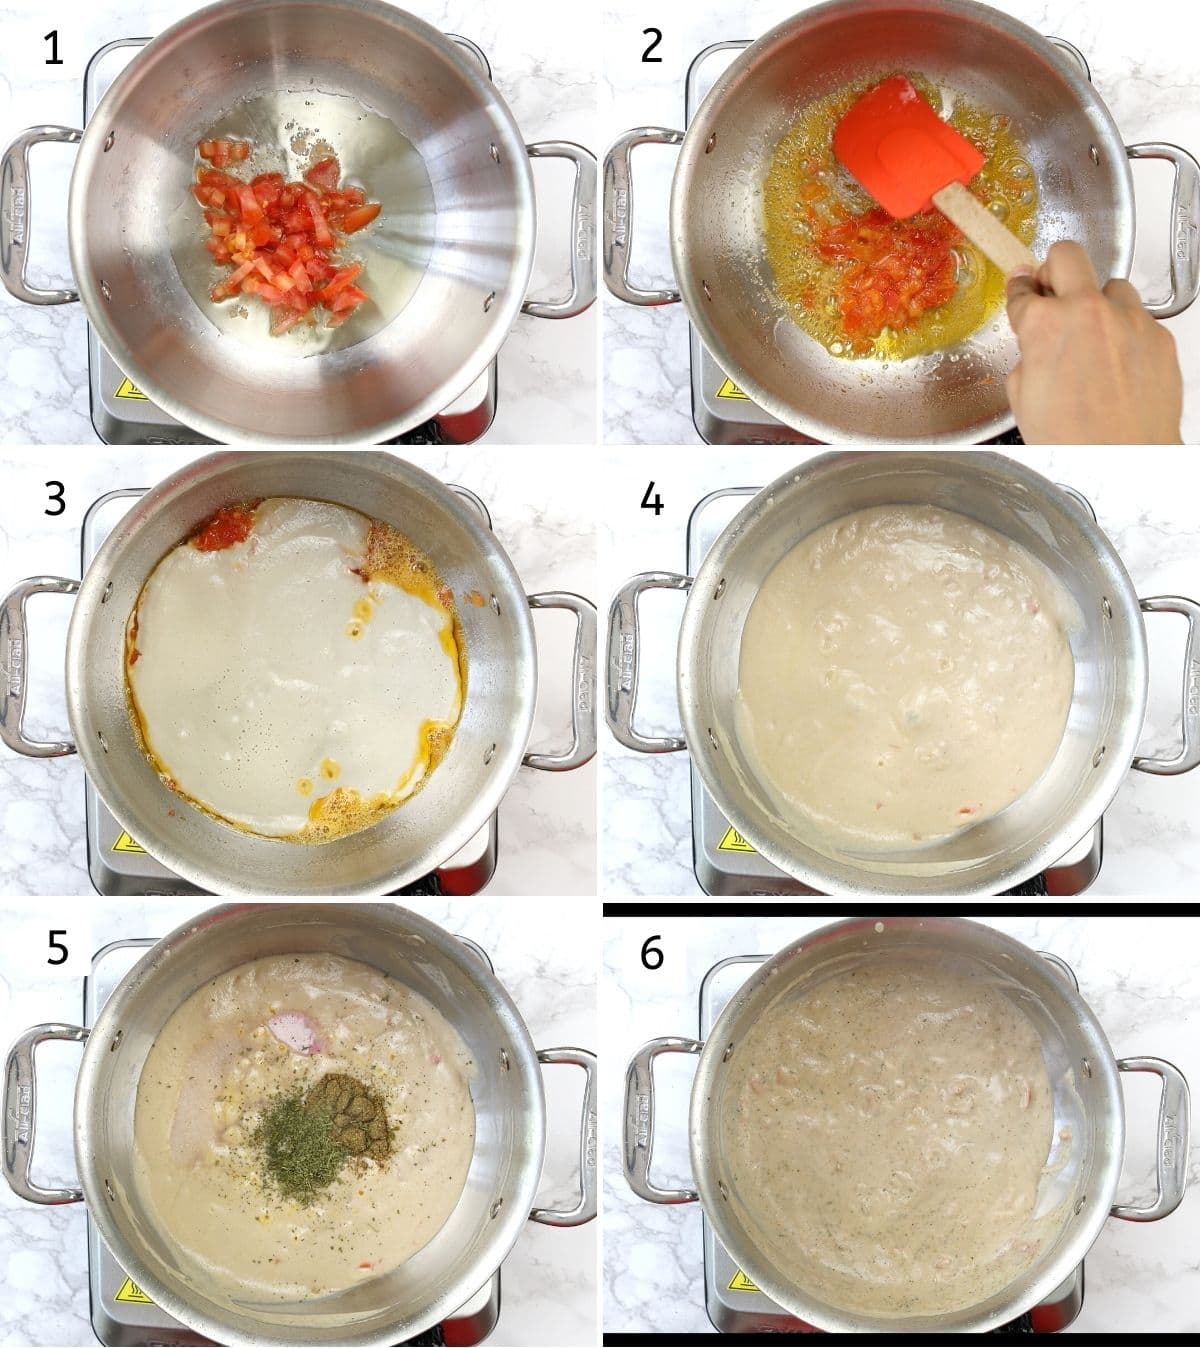 Collage of 6 steps showing cooking tomatoes, mixing onion paste, adding spices and mixing.